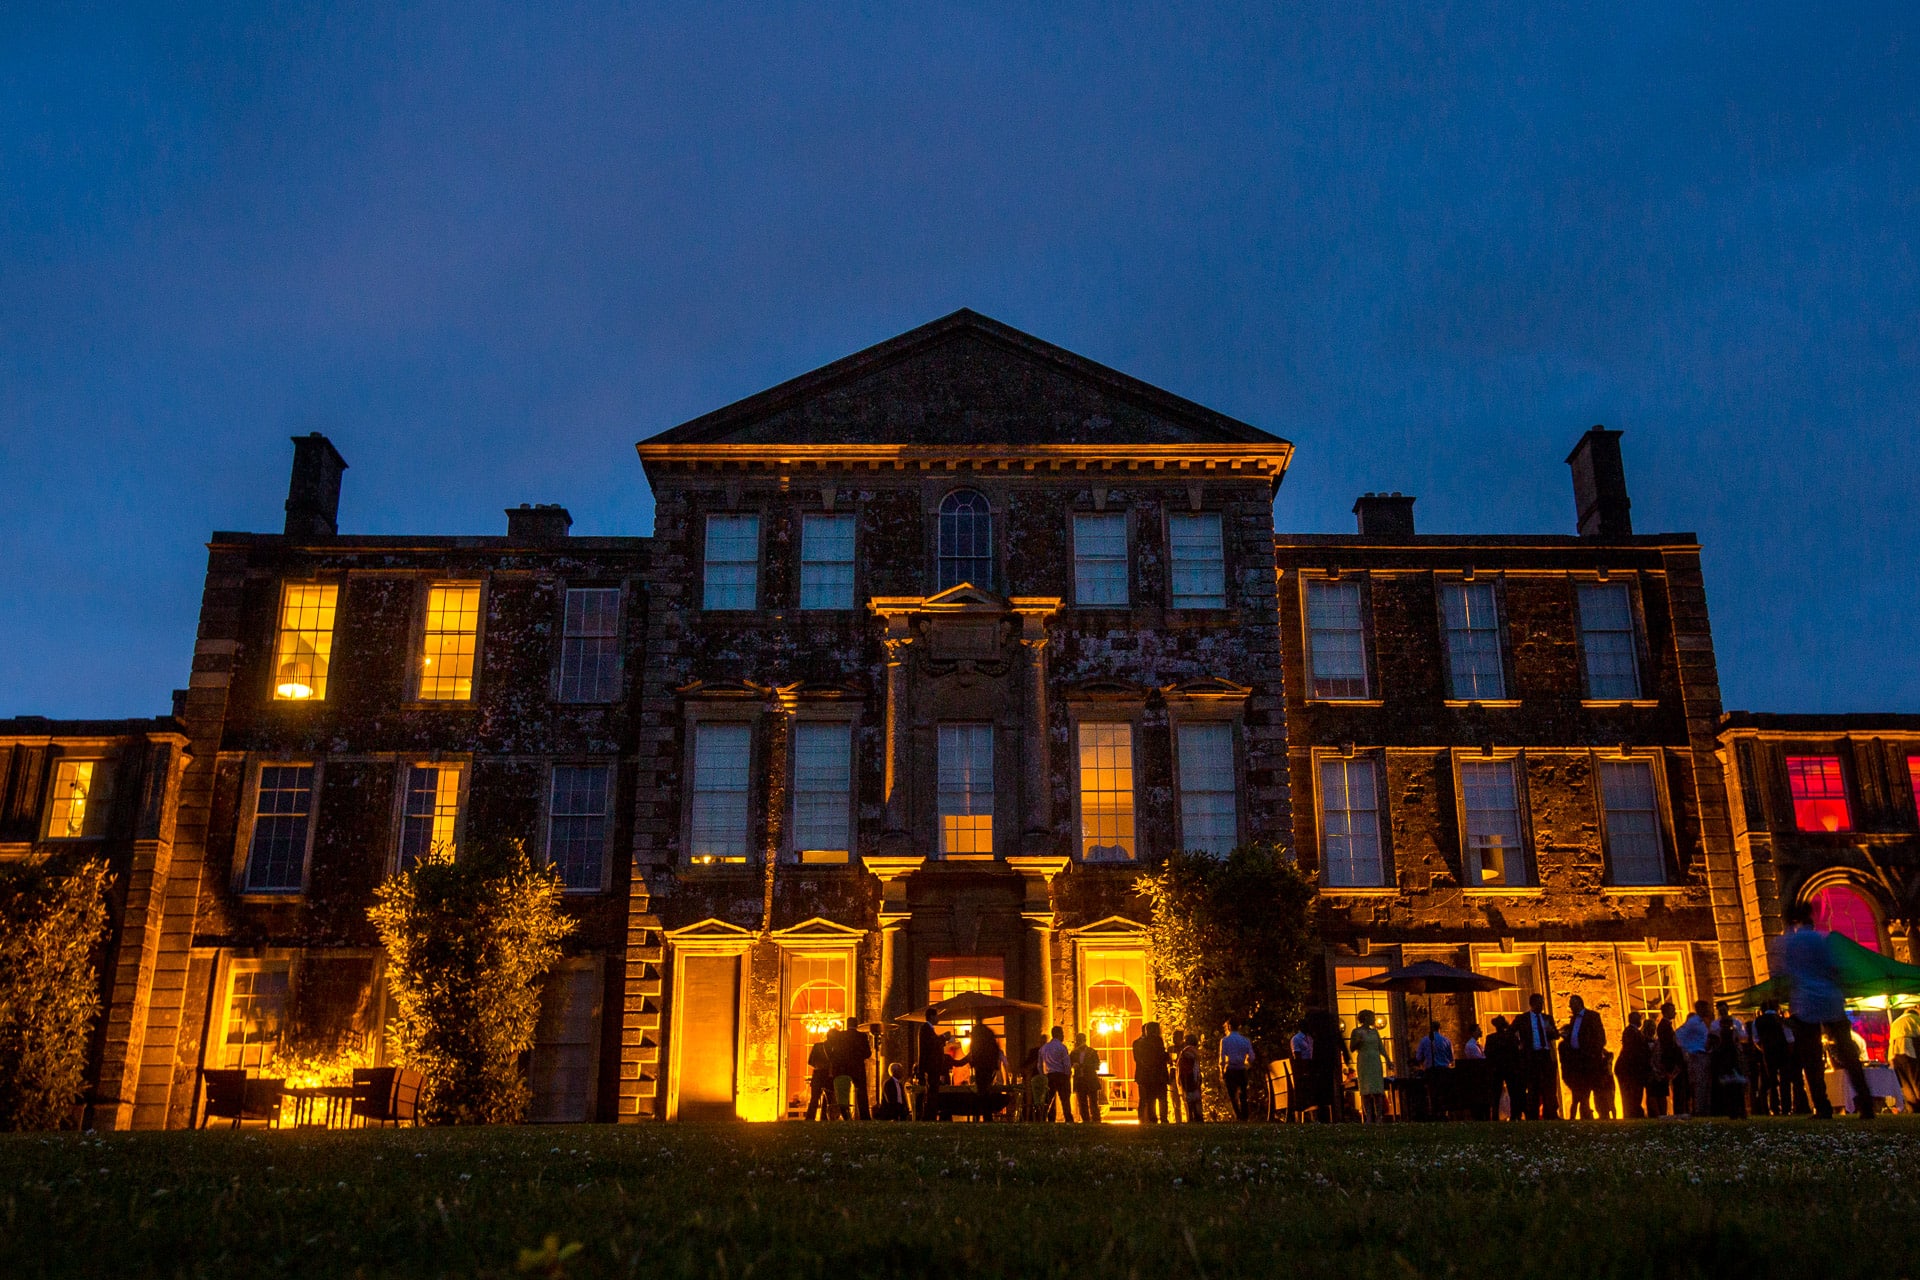 night time at Aynhoe Park